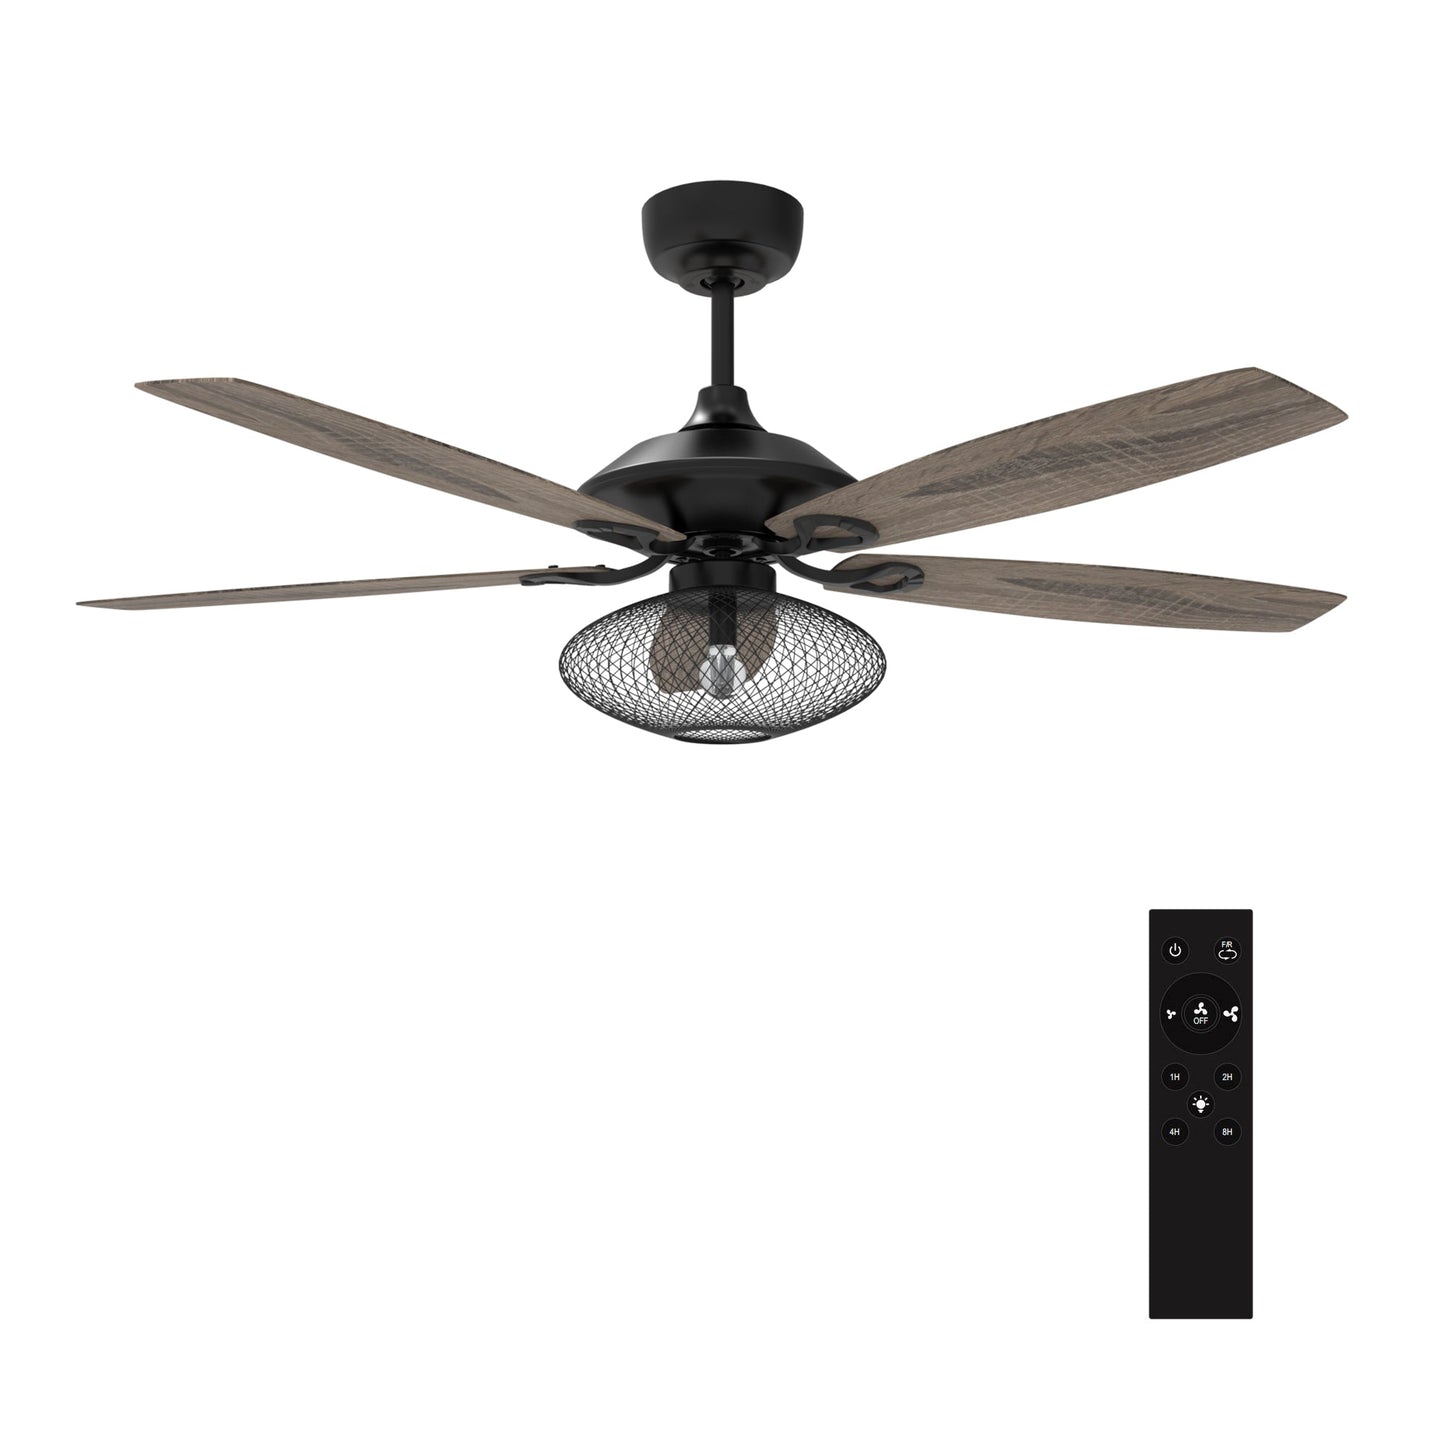 Karson 52 Inch 5-Blade Best Ceiling Fan With Light & Remote - Black/Wood (Reversible Blades)